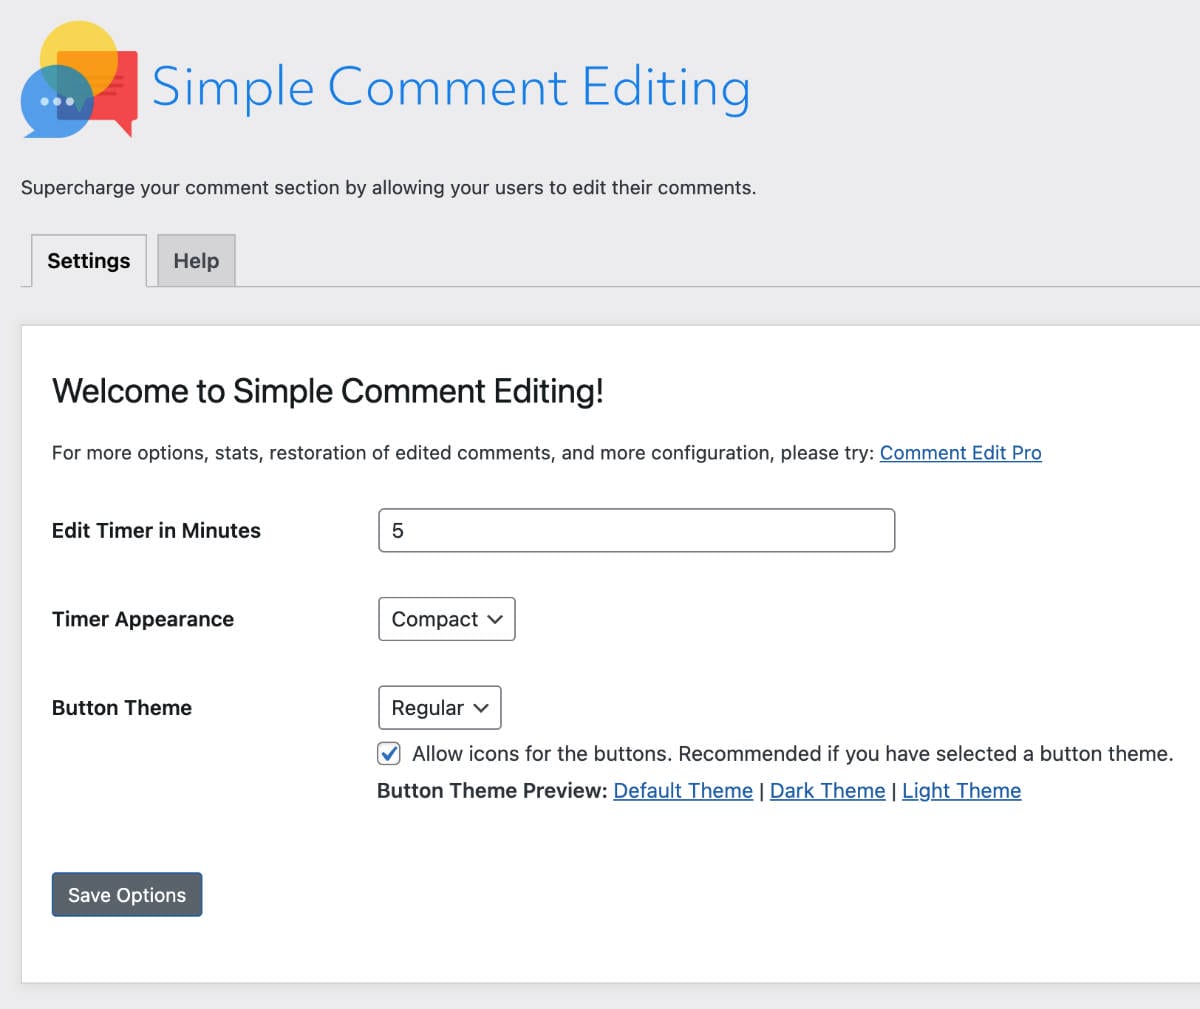 Simple Comment Editing Admin